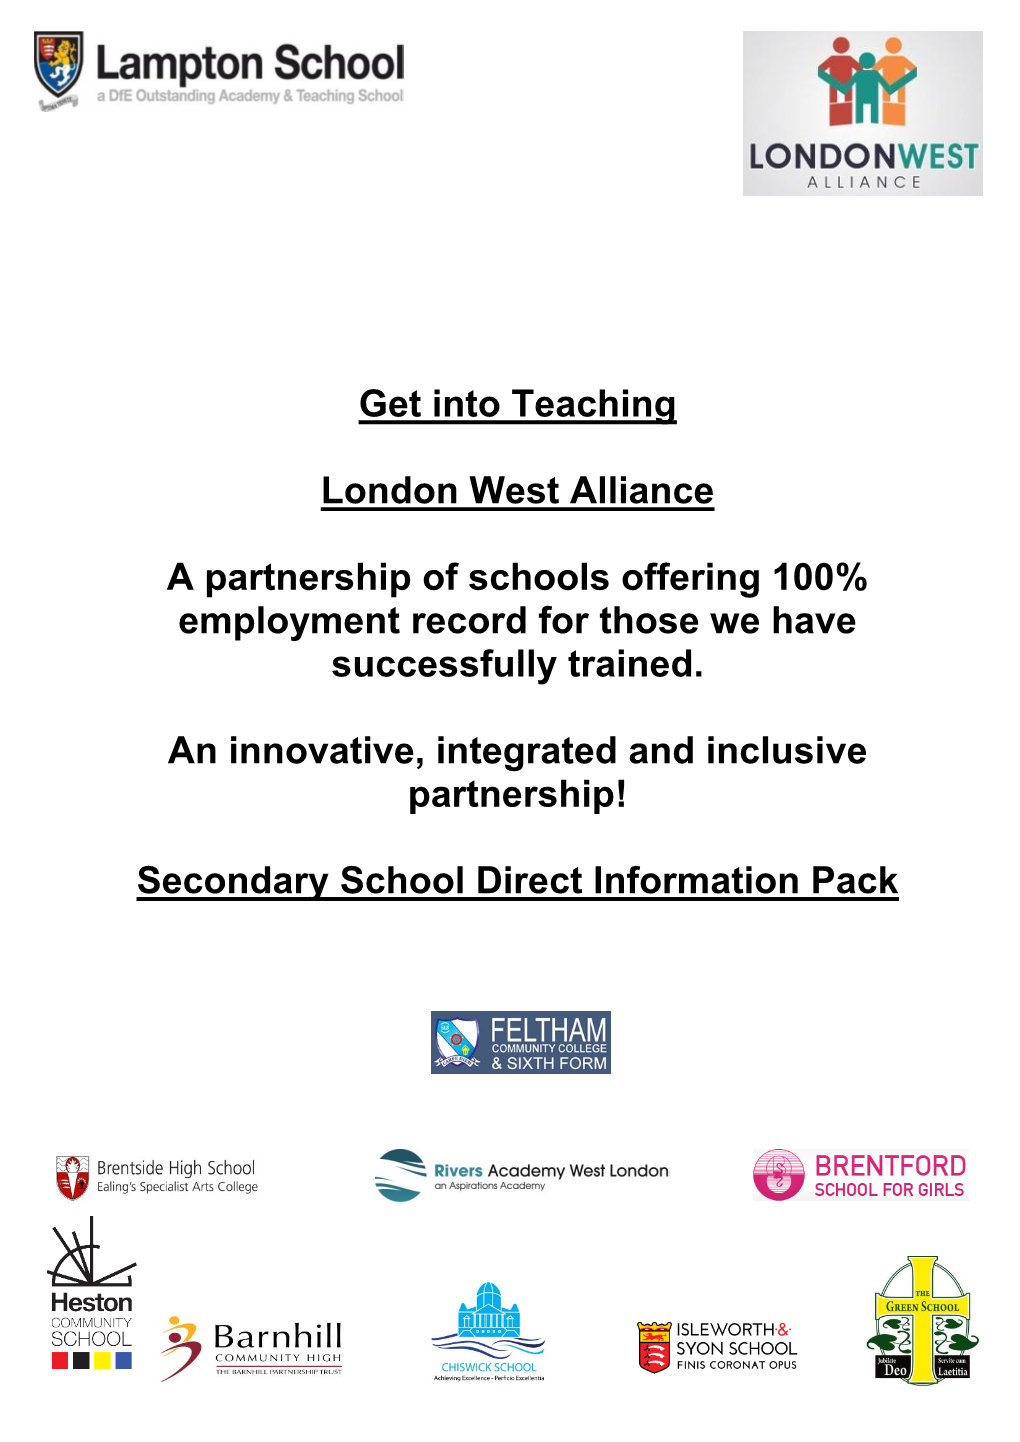 Get Into Teaching London West Alliance a Partnership of Schools Offering 100% Employment Record for Those We Have Successfully